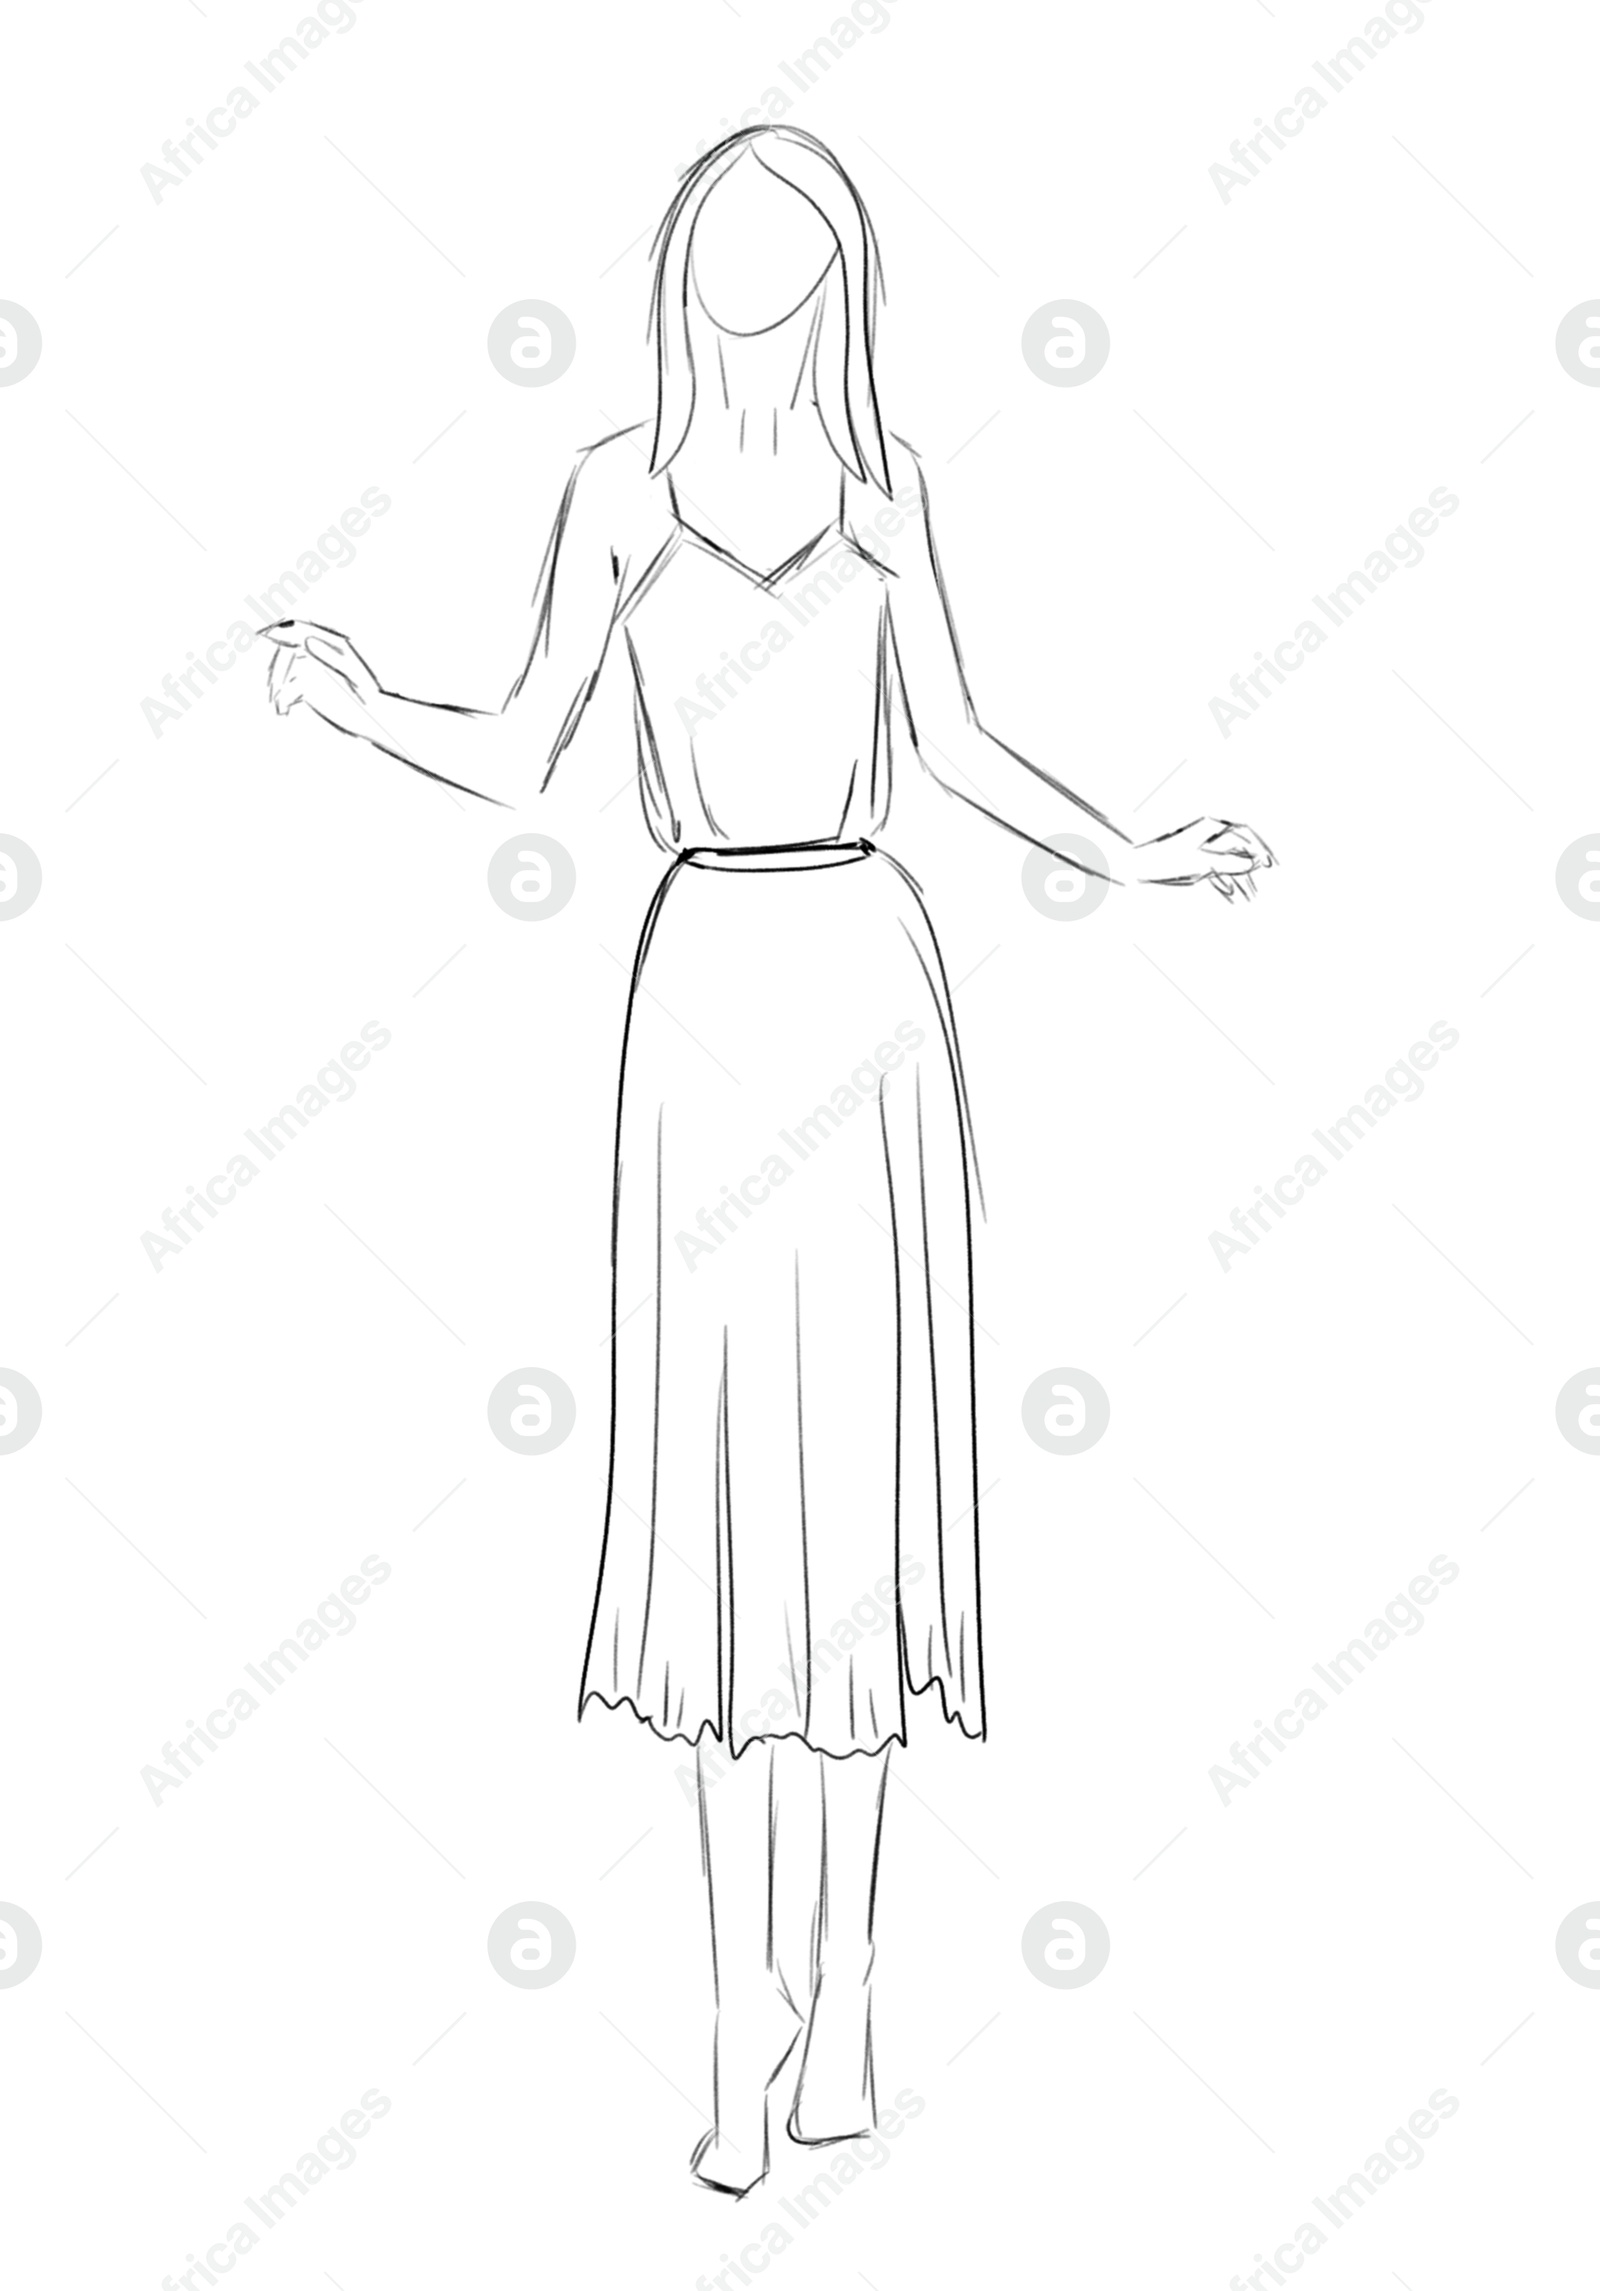 Image of Fashion designer. Sketch of woman in stylish dress on white background